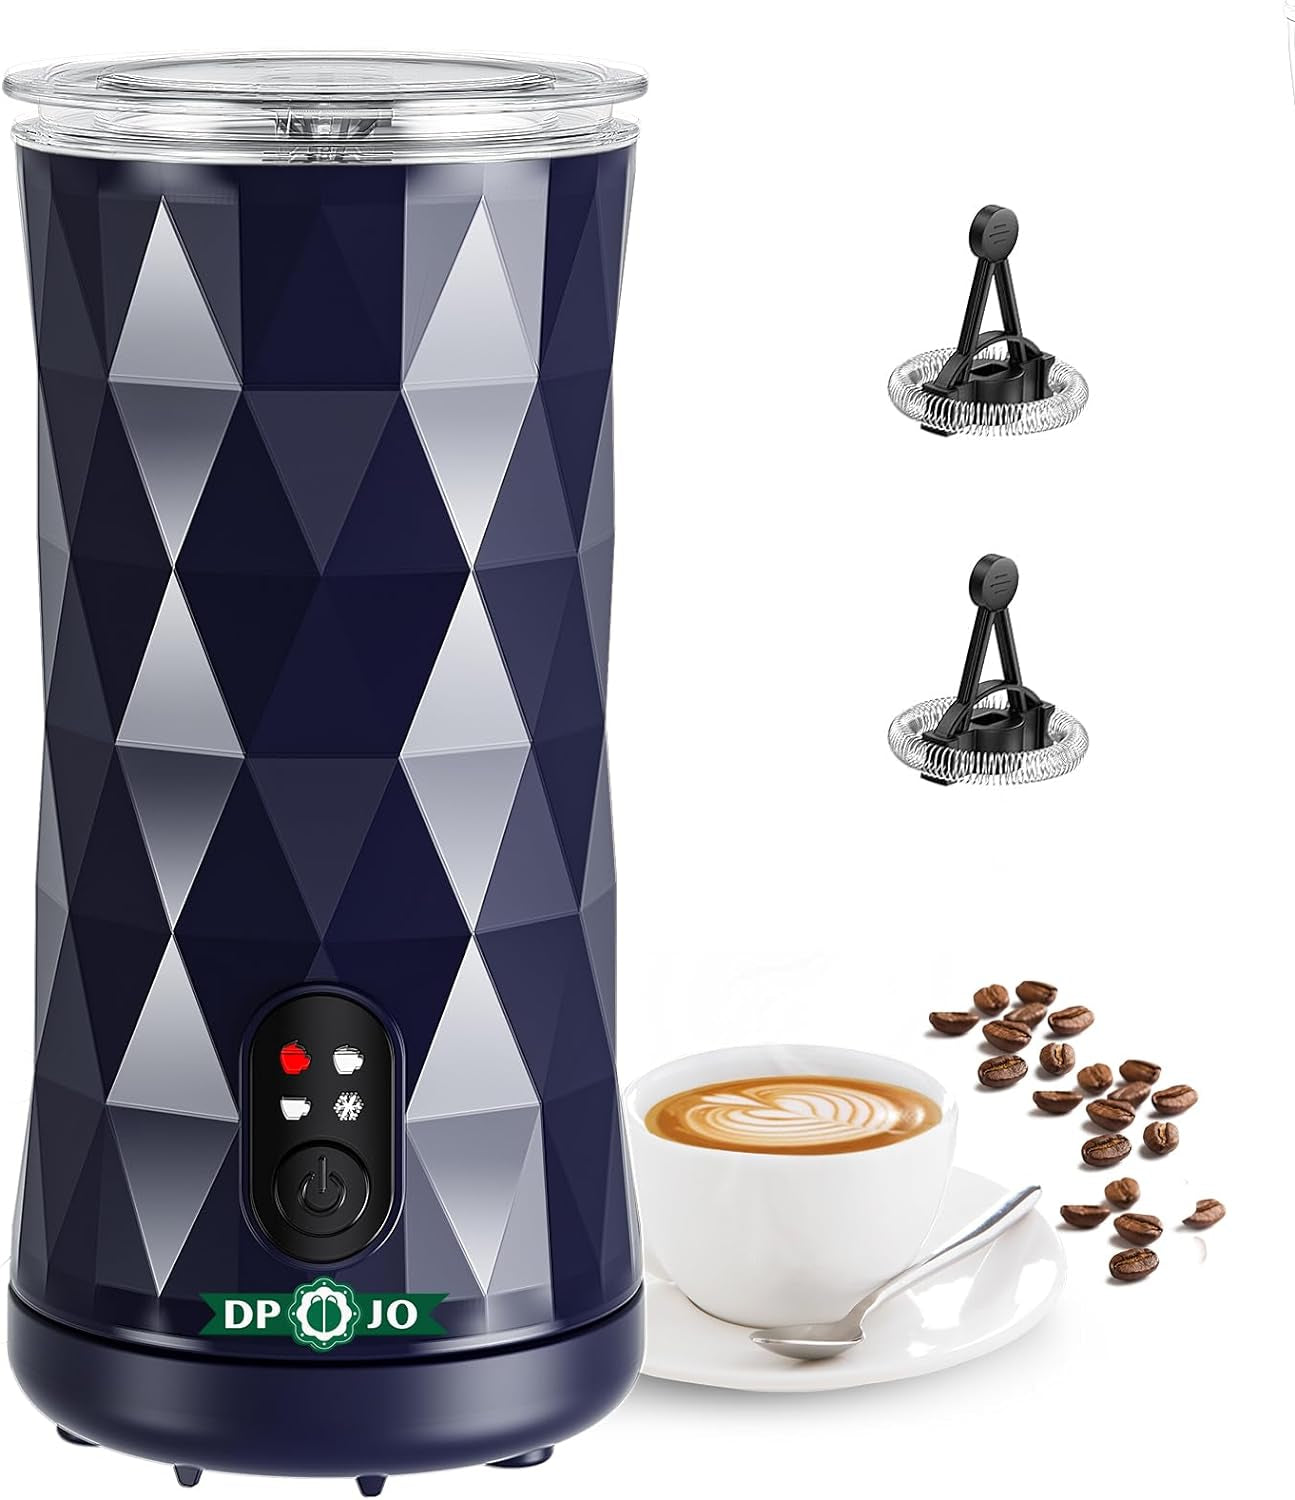  Starument Electric Milk Frother and Steamer - Automatic Milk  Foamer & Heater for Coffee, Latte, Cappuccino, Other Creamy Drinks - 4  Settings for Cold Foam, Airy Milk Foam, Dense Foam 